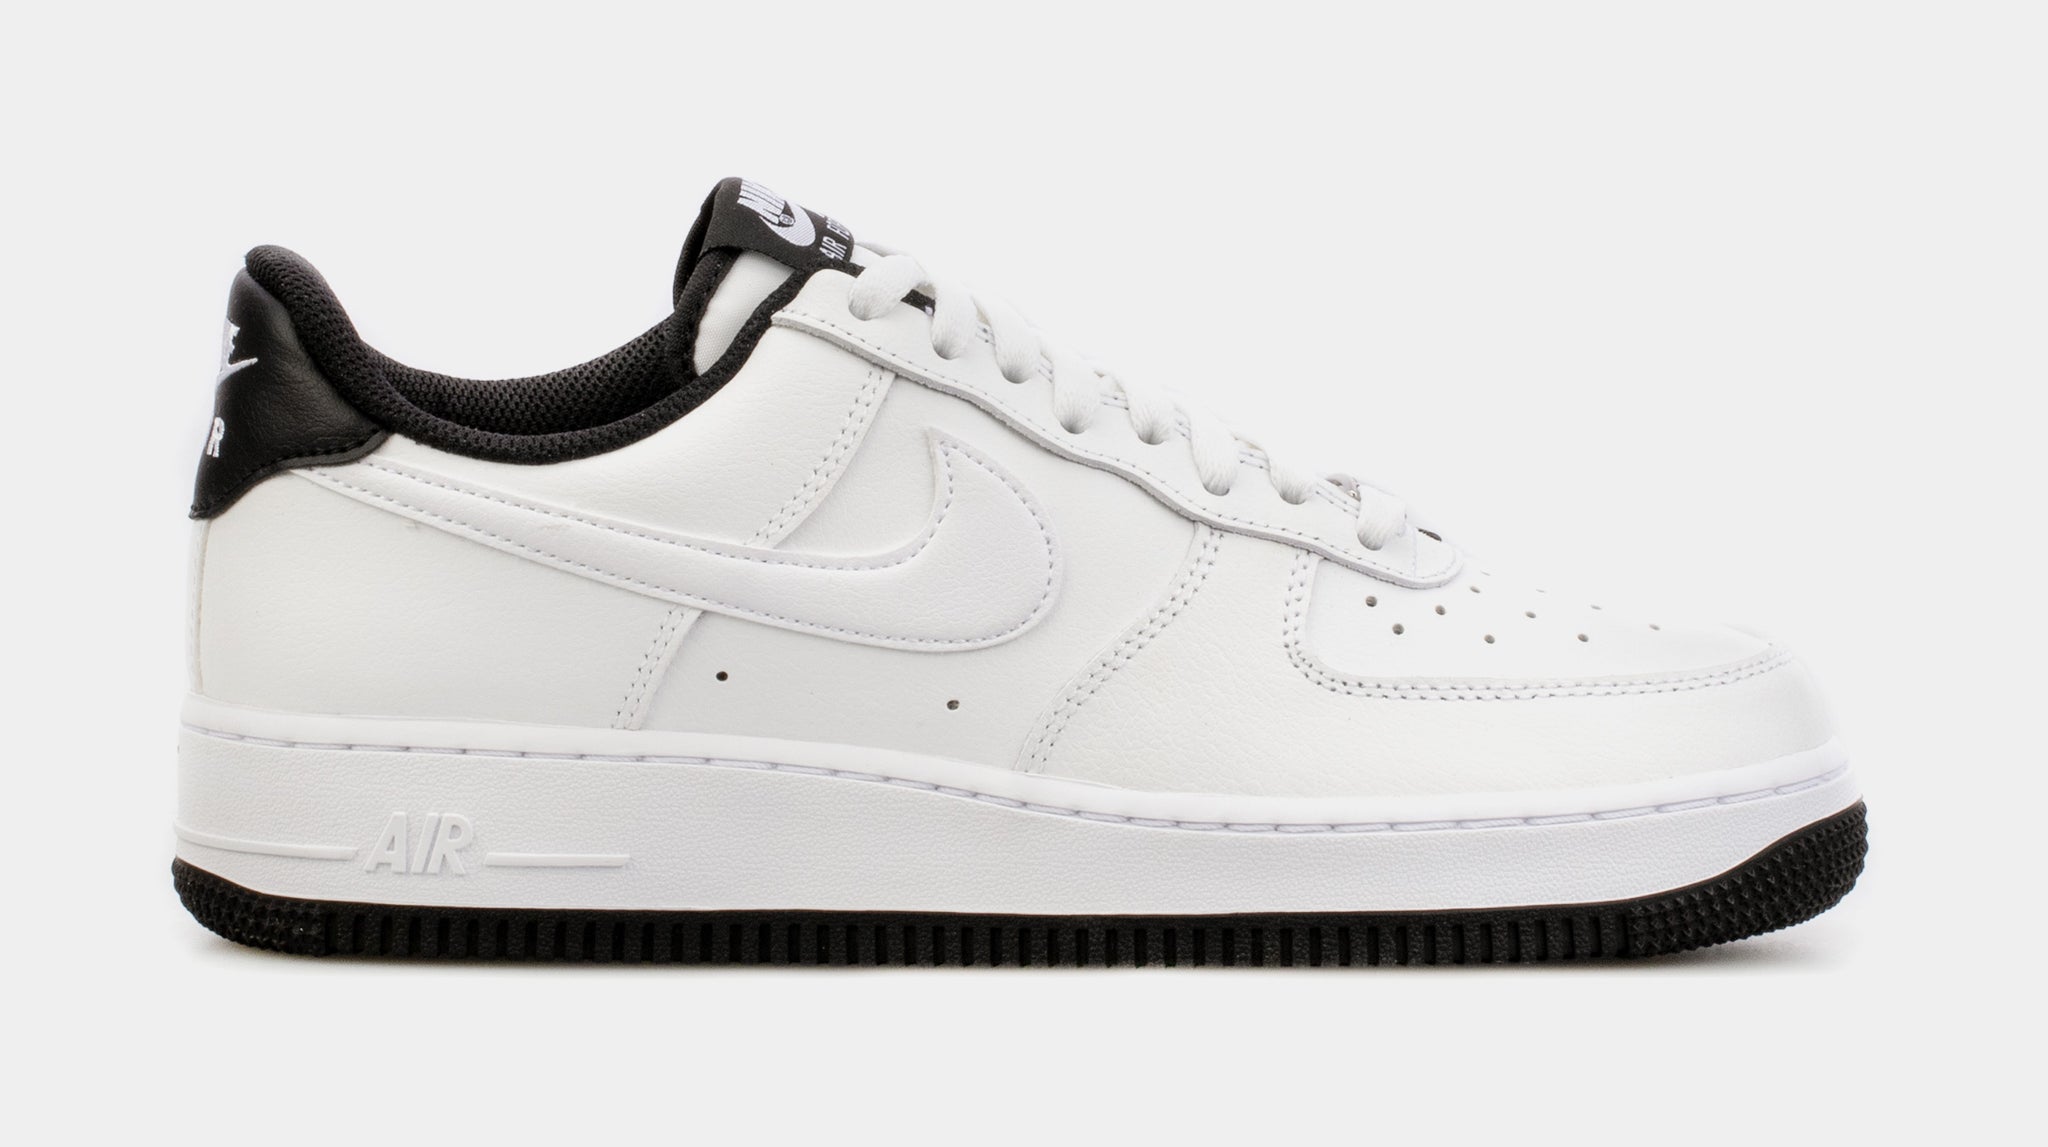 Nike Air Force 1 07 Mens Lifestyle Shoes White CT2302-100 – Shoe Palace